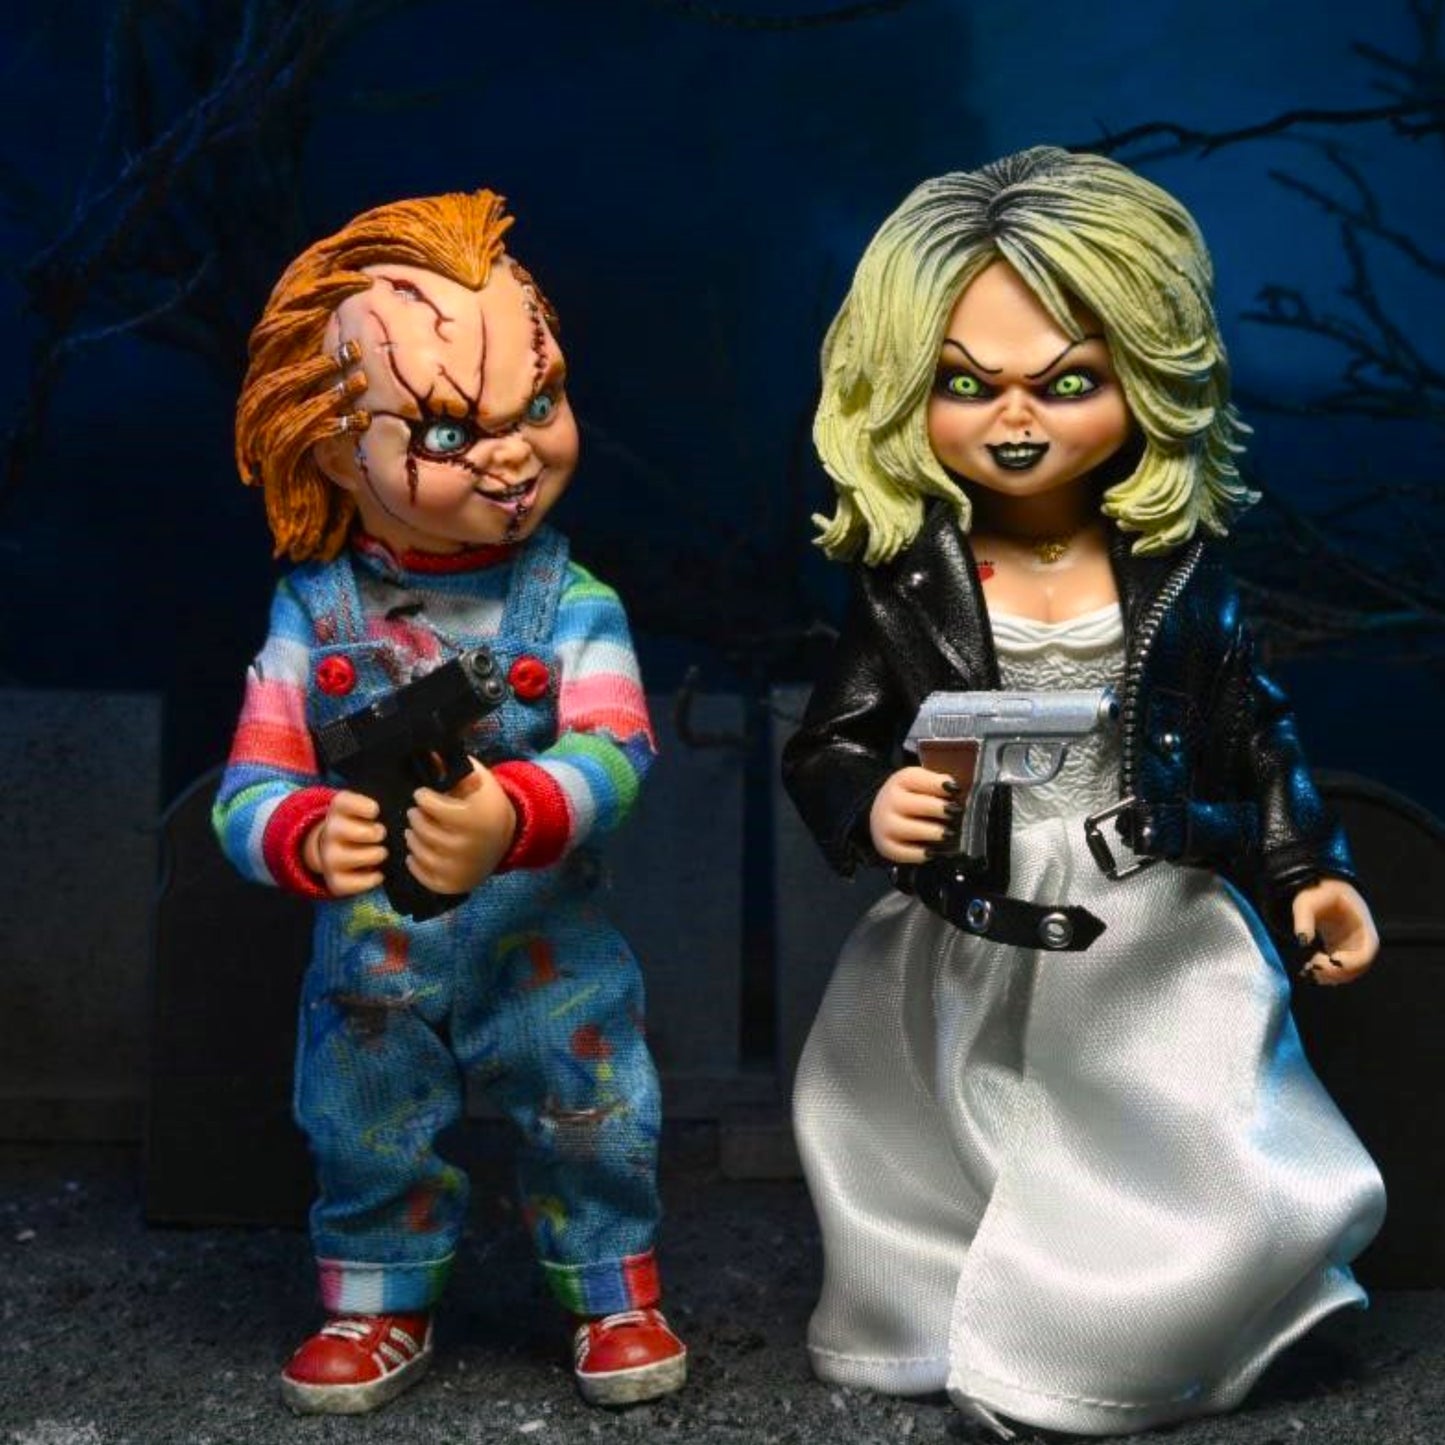 Chucky and Tiffany (Bride of Chuckie) 5.5" Clothed Action Figure Set